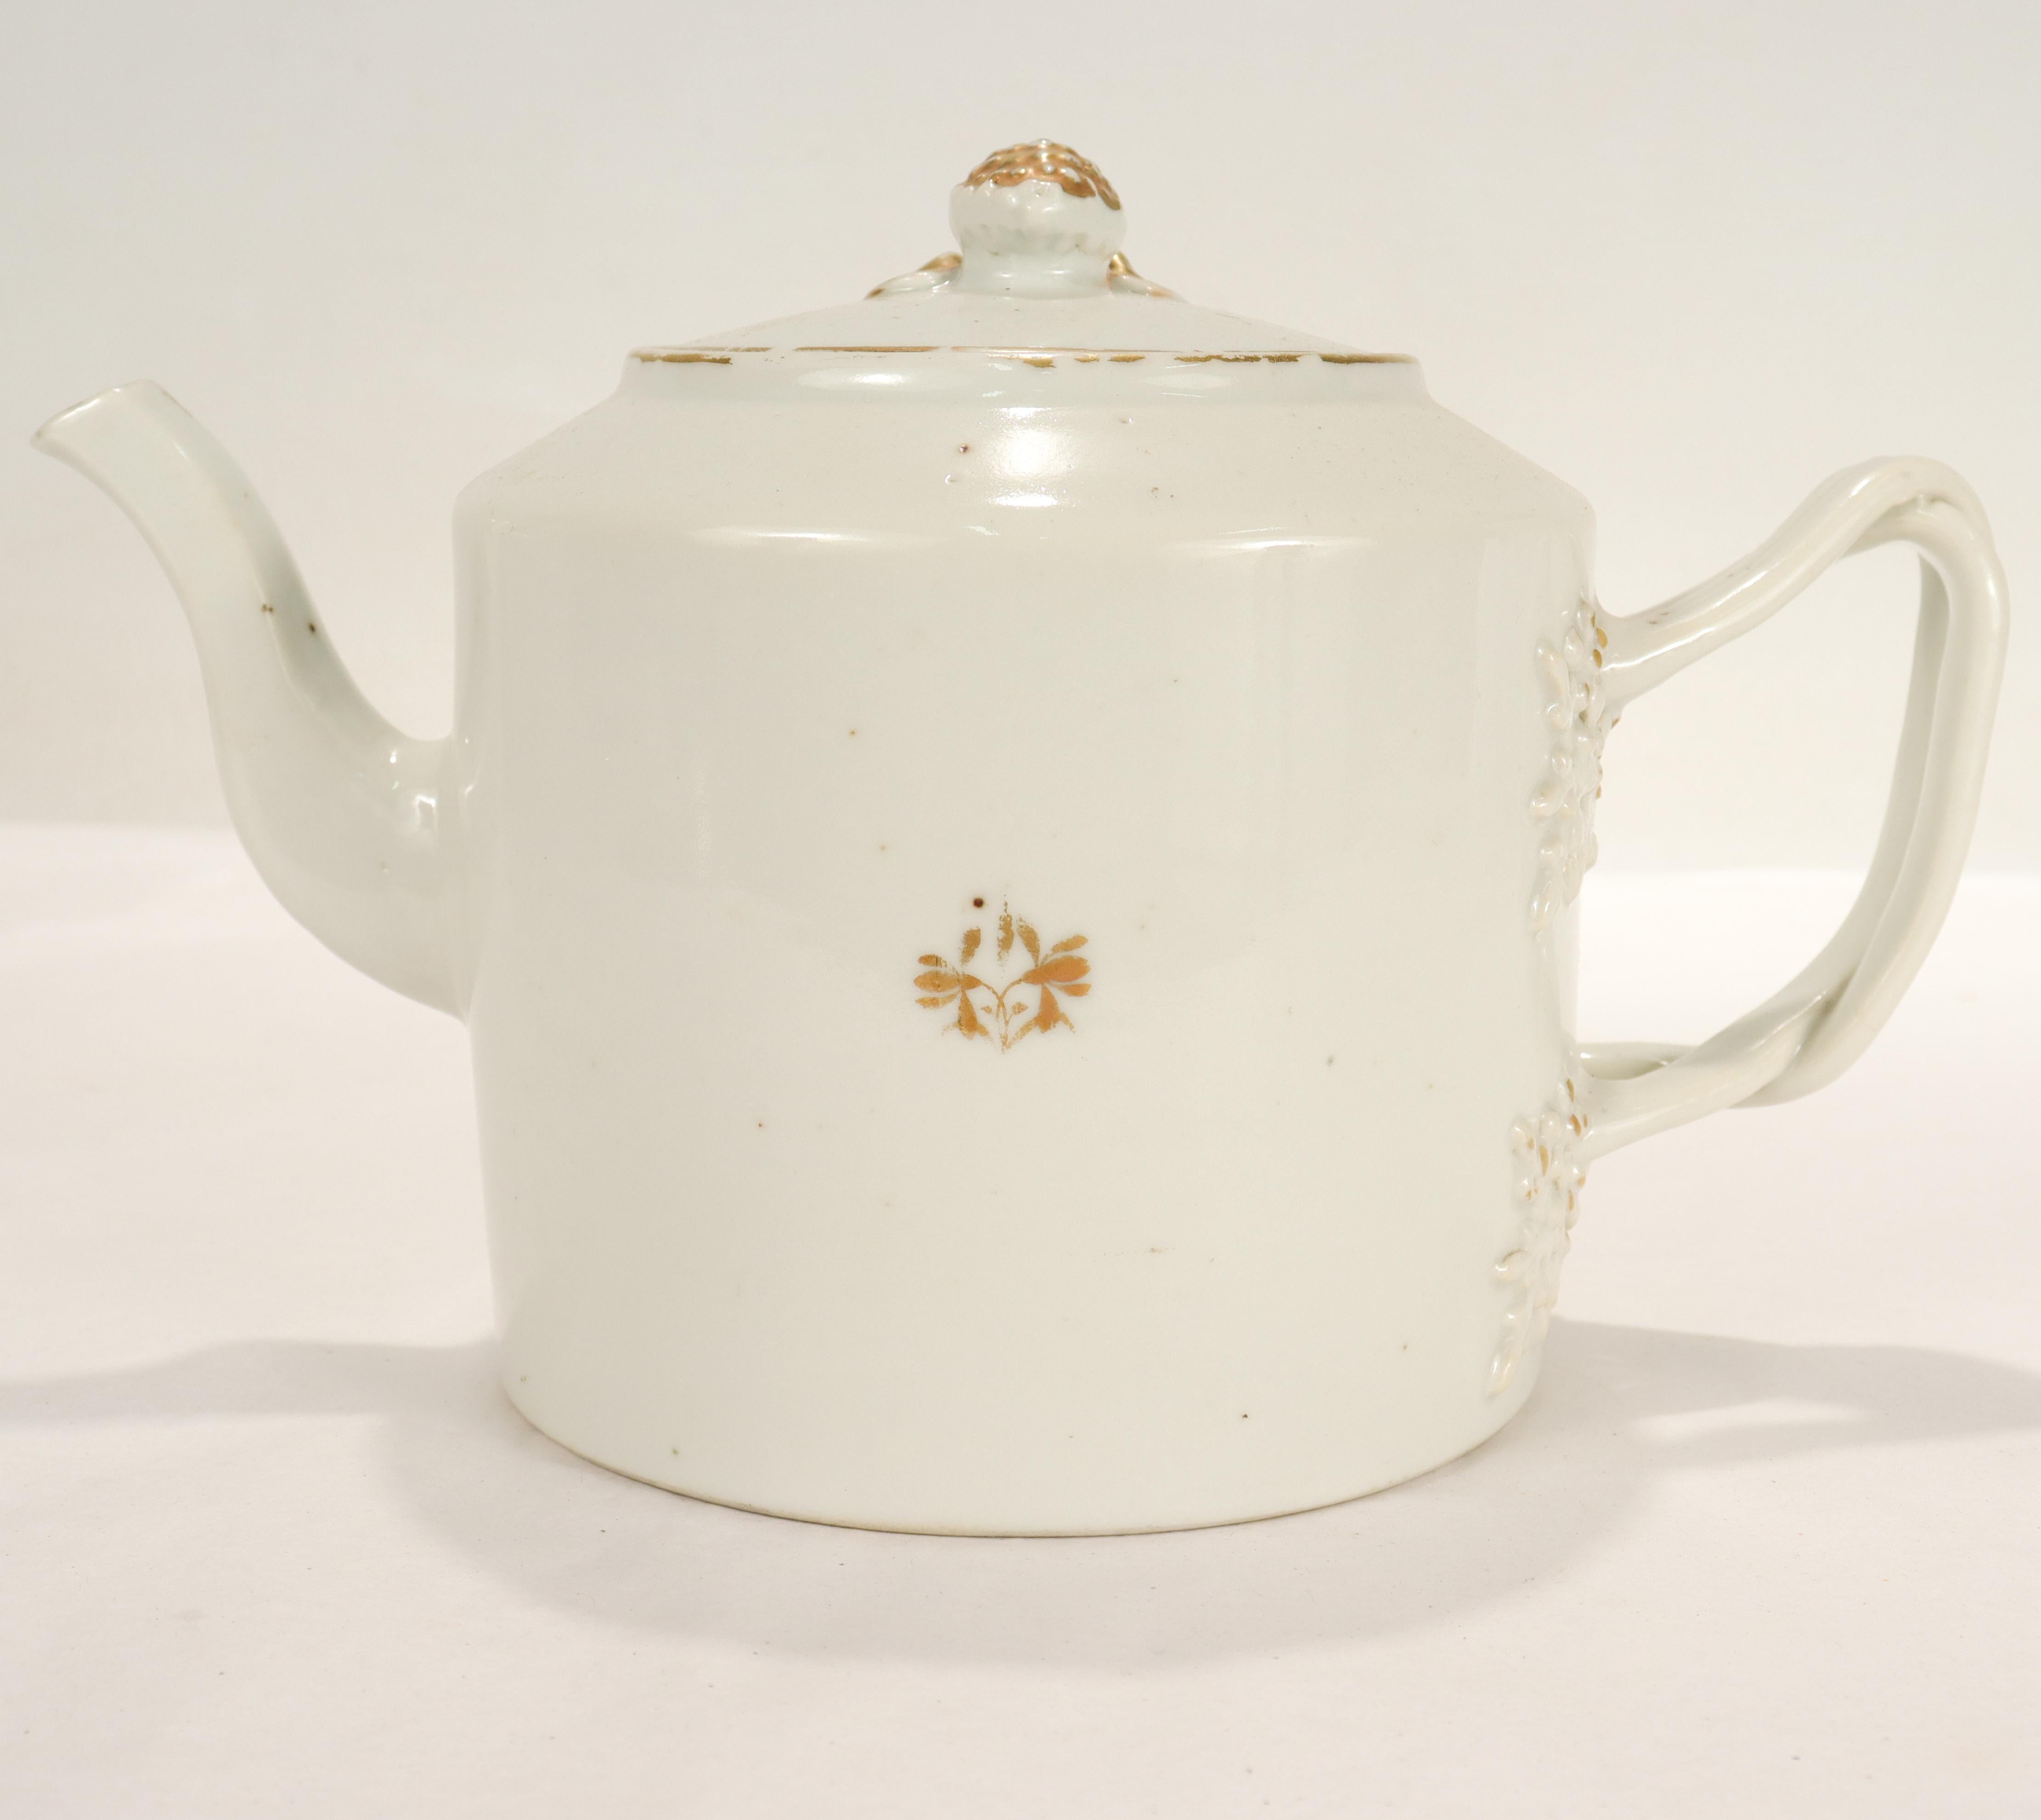 A fine old or antique Chinese export porcelain teapot. 

Decorated throughout with faded gilding and raised figural floral devices

The C-shaped handle is in the form of branches with raised leaf decoration where the handle meets the teapot's